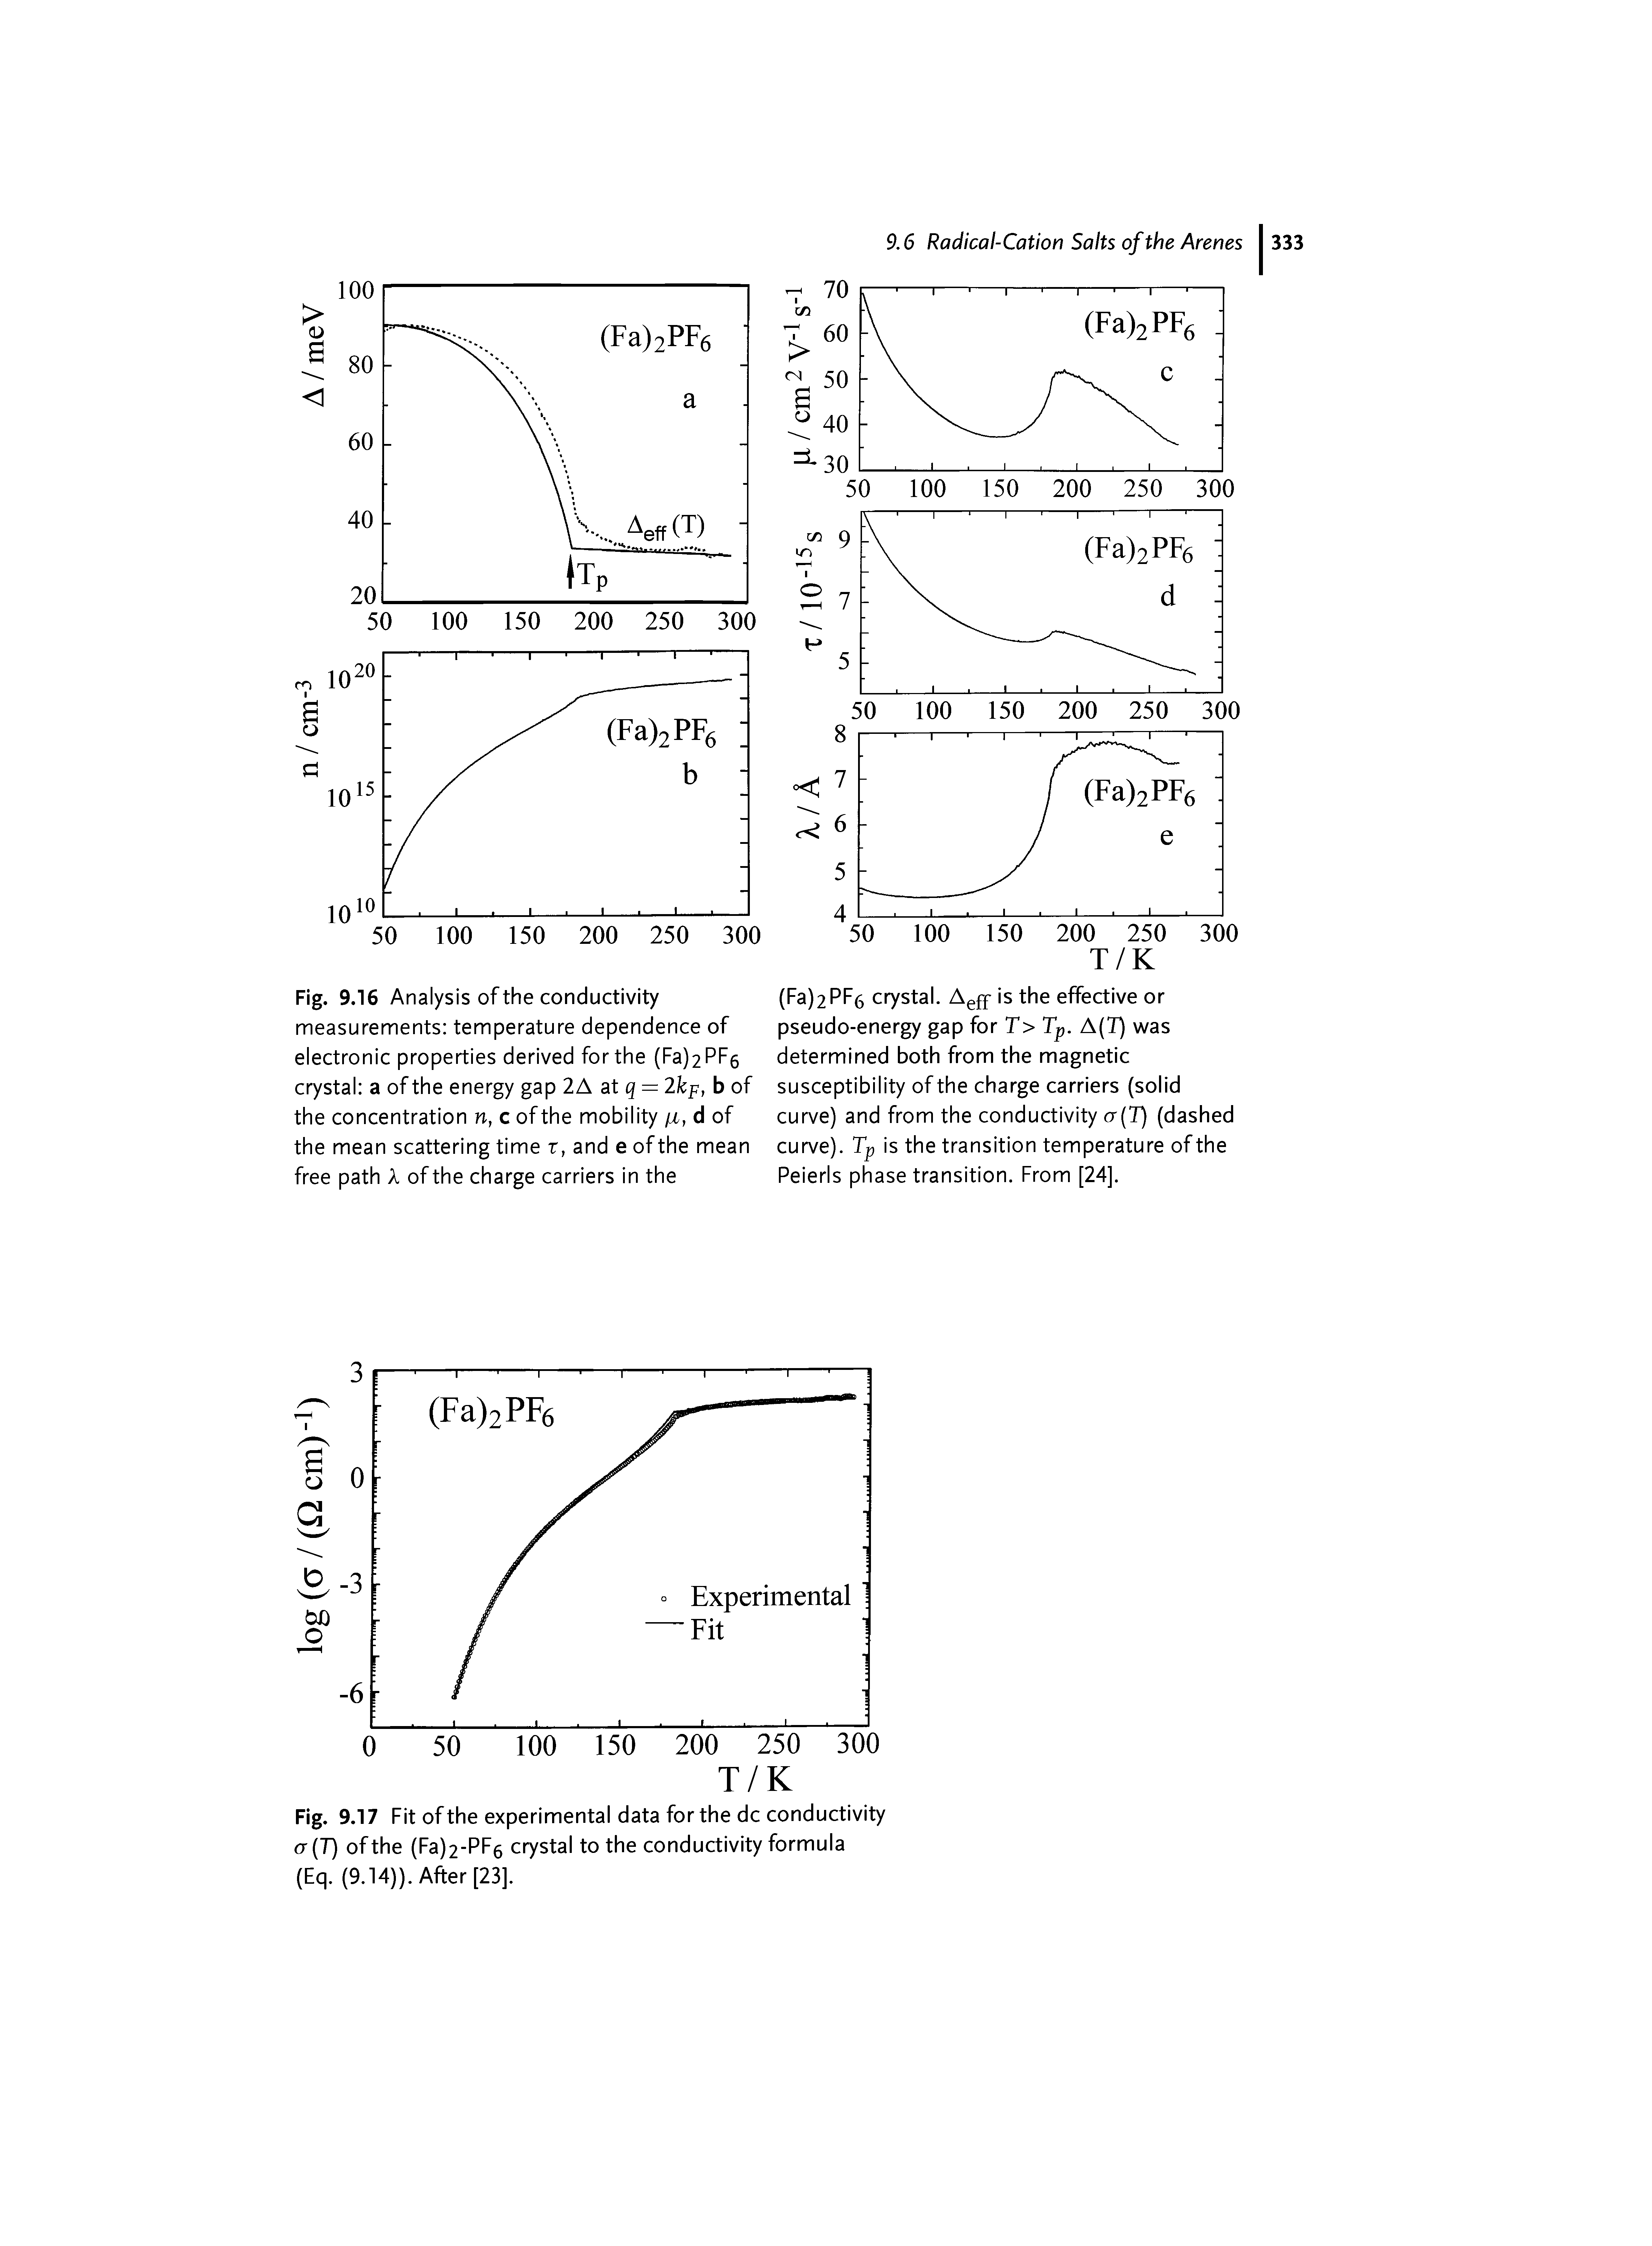 Fig. 9.16 Analysis of the conductivity measurements temperature dependence of electronic properties derived for the (Fa)2PFe crystal a of the energy gap 2A at = 2kp, b of the concentration n, c of the mobility [jl, d of the mean scattering time r, and e of the mean free path X of the charge carriers in the...